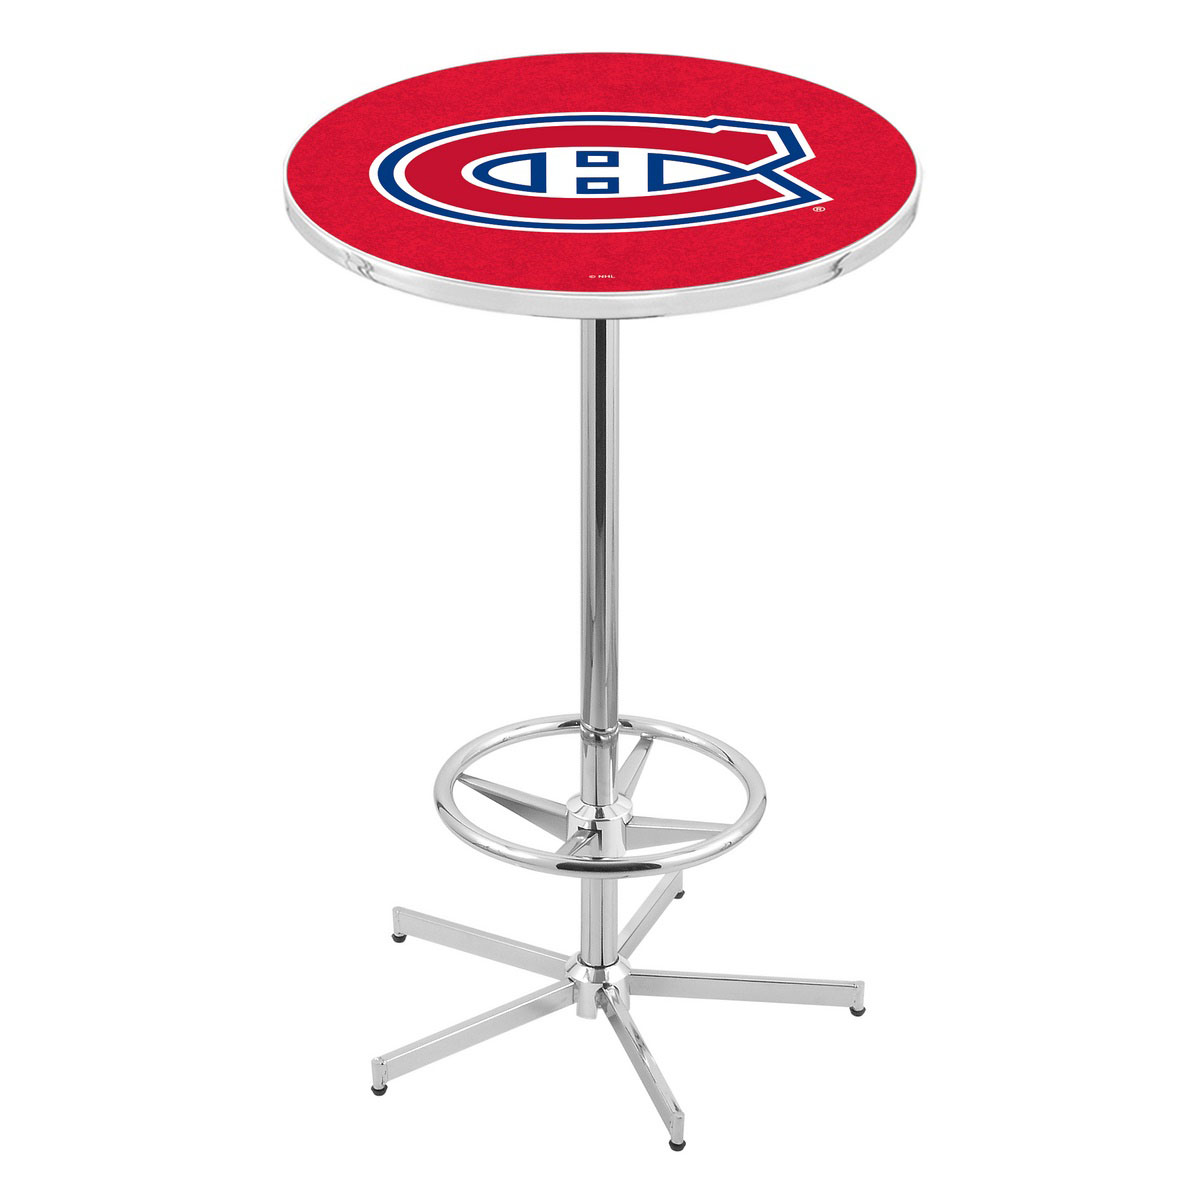 42 Inch Chrome Montreal Canadiens Pub Table